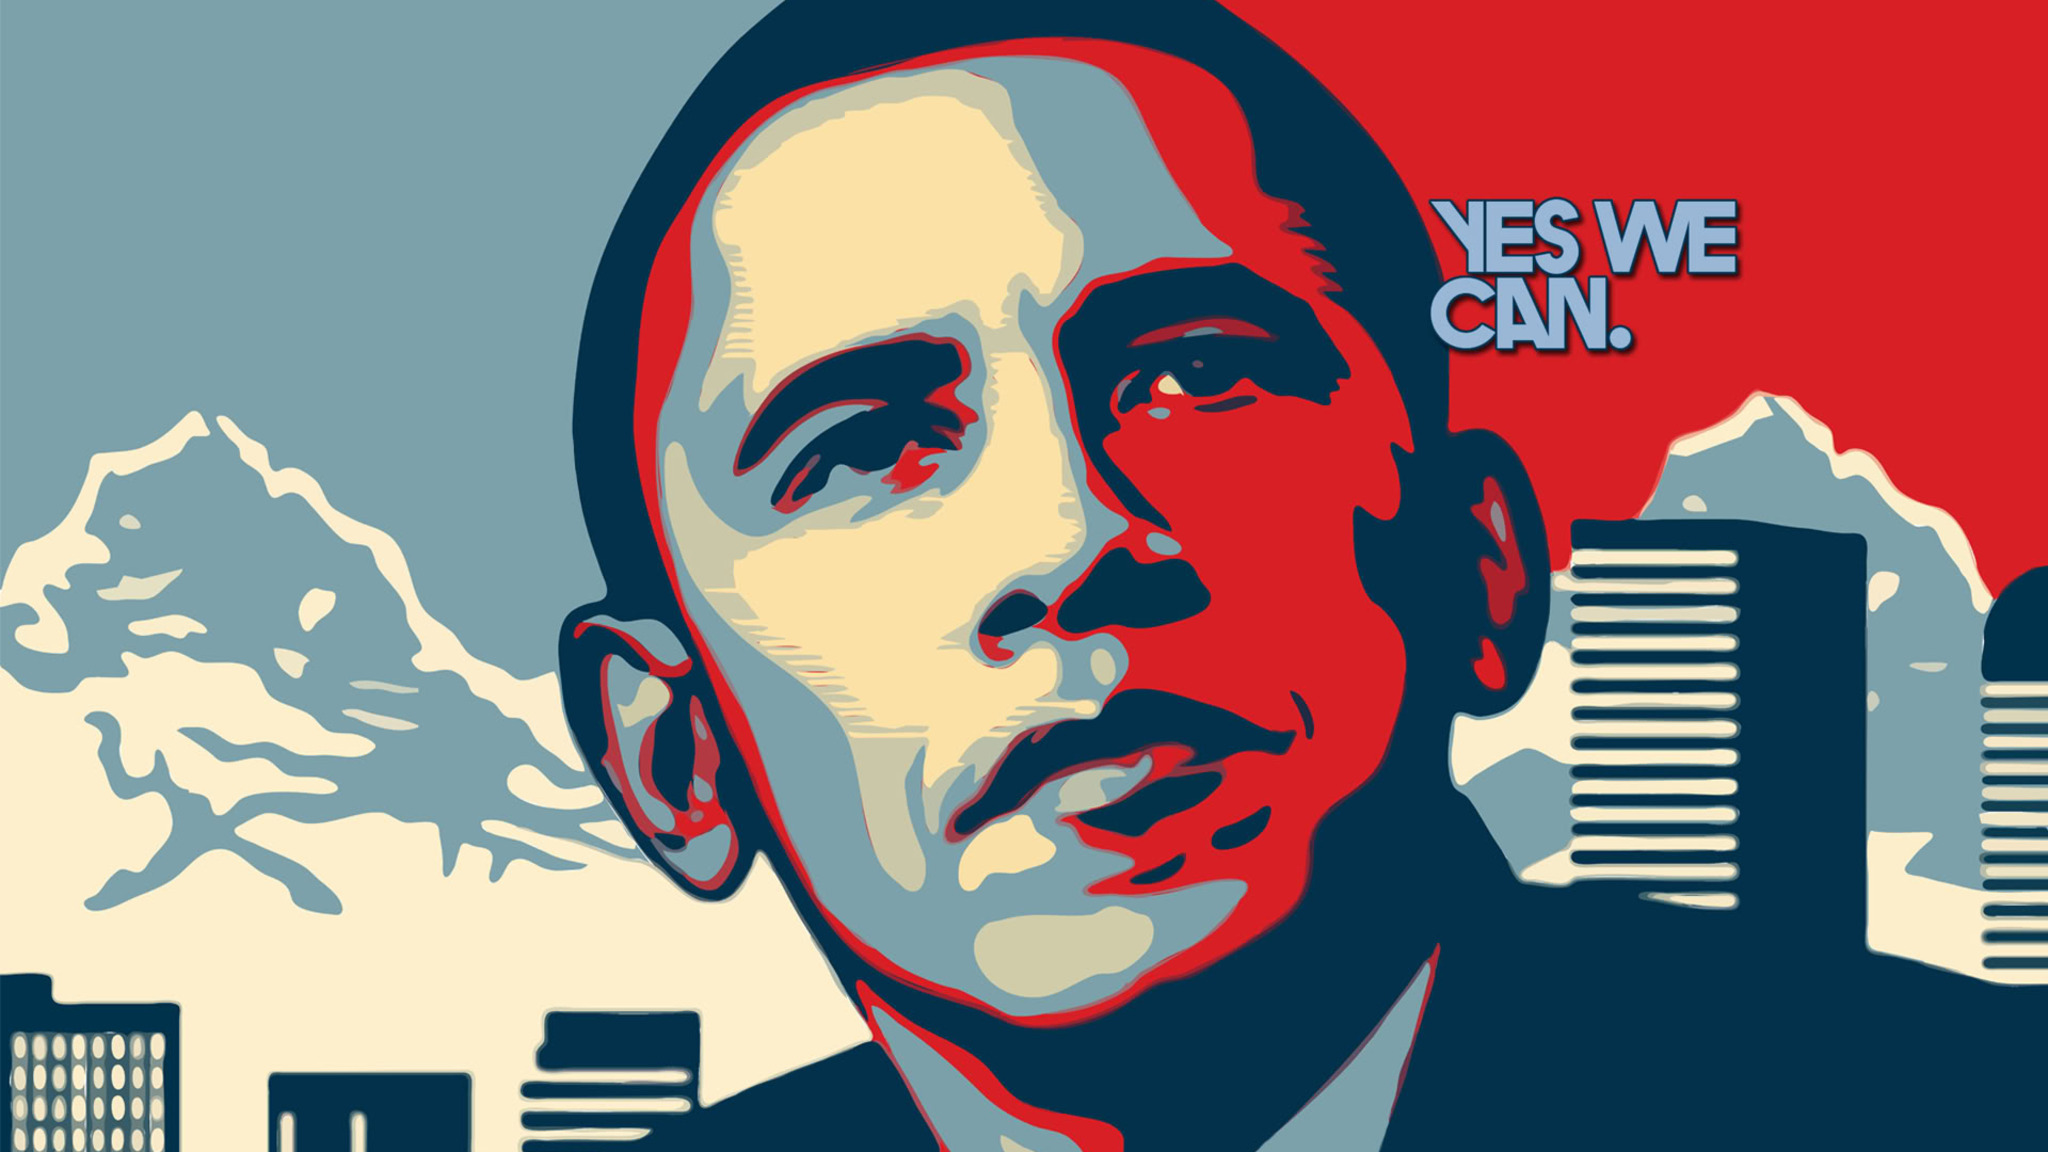 Obama campaign Yes we can|